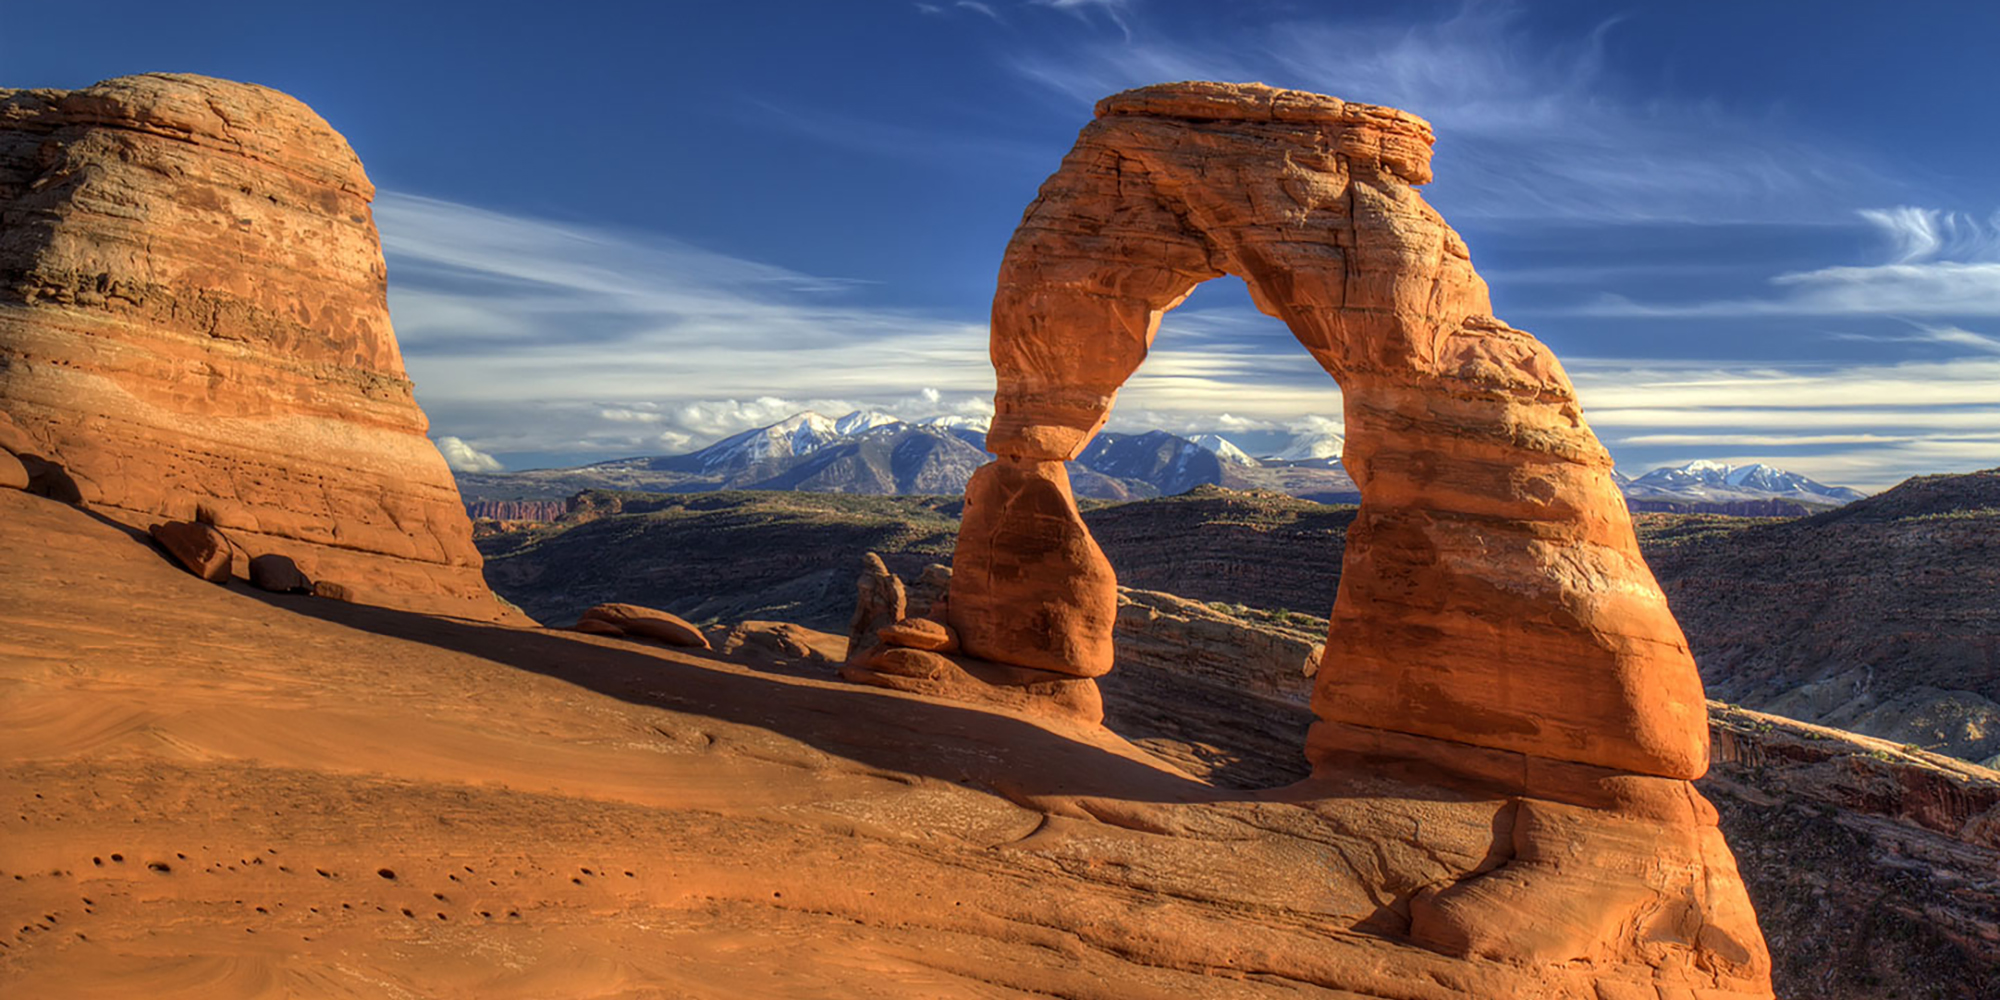 Lodging and places to stay near Zion, Arches, Bryce Canyon and more national parks in Southern Utah and Northern Arizona